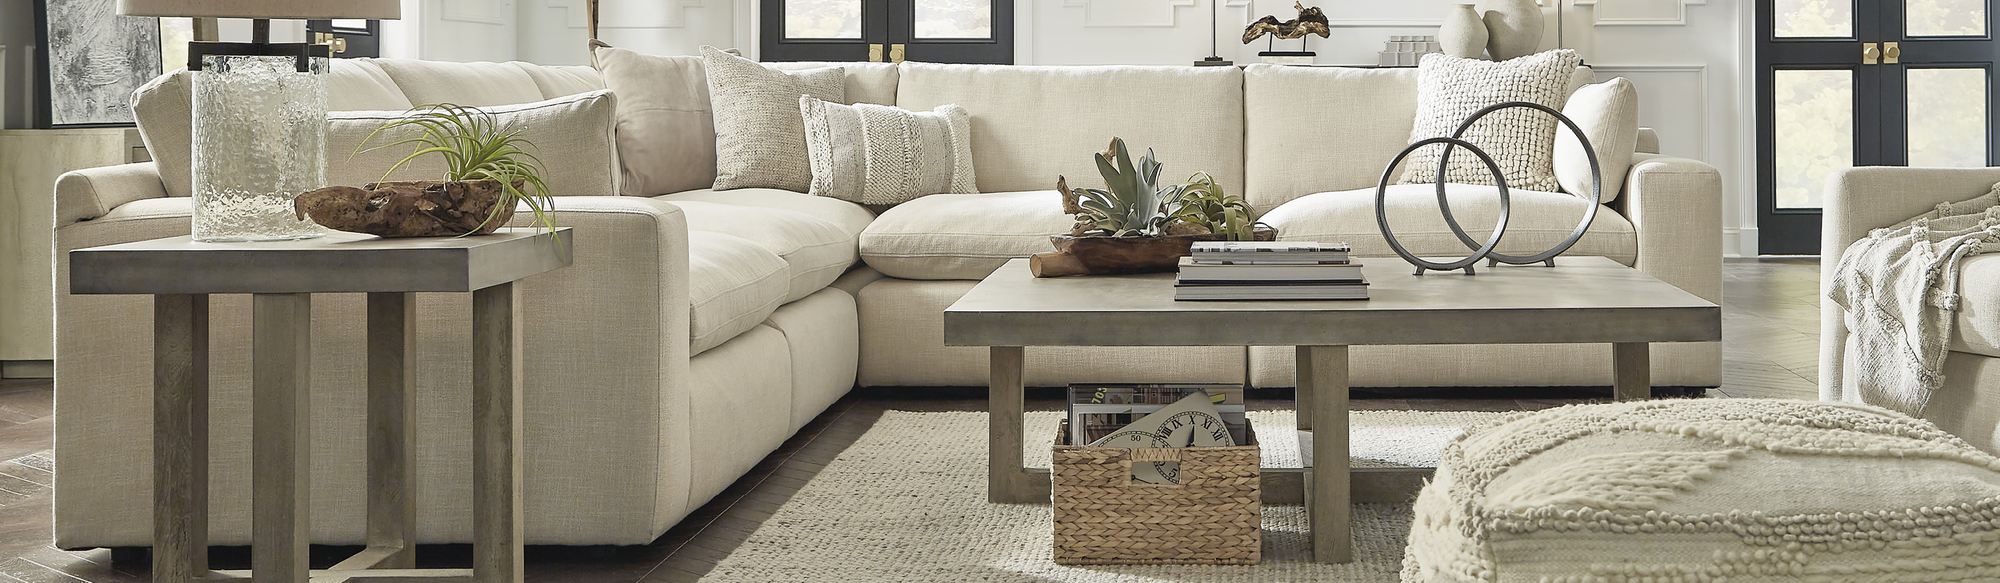 Shop the Elyza Sectional at JR Furniture Store in Fayetteville, NC 28311